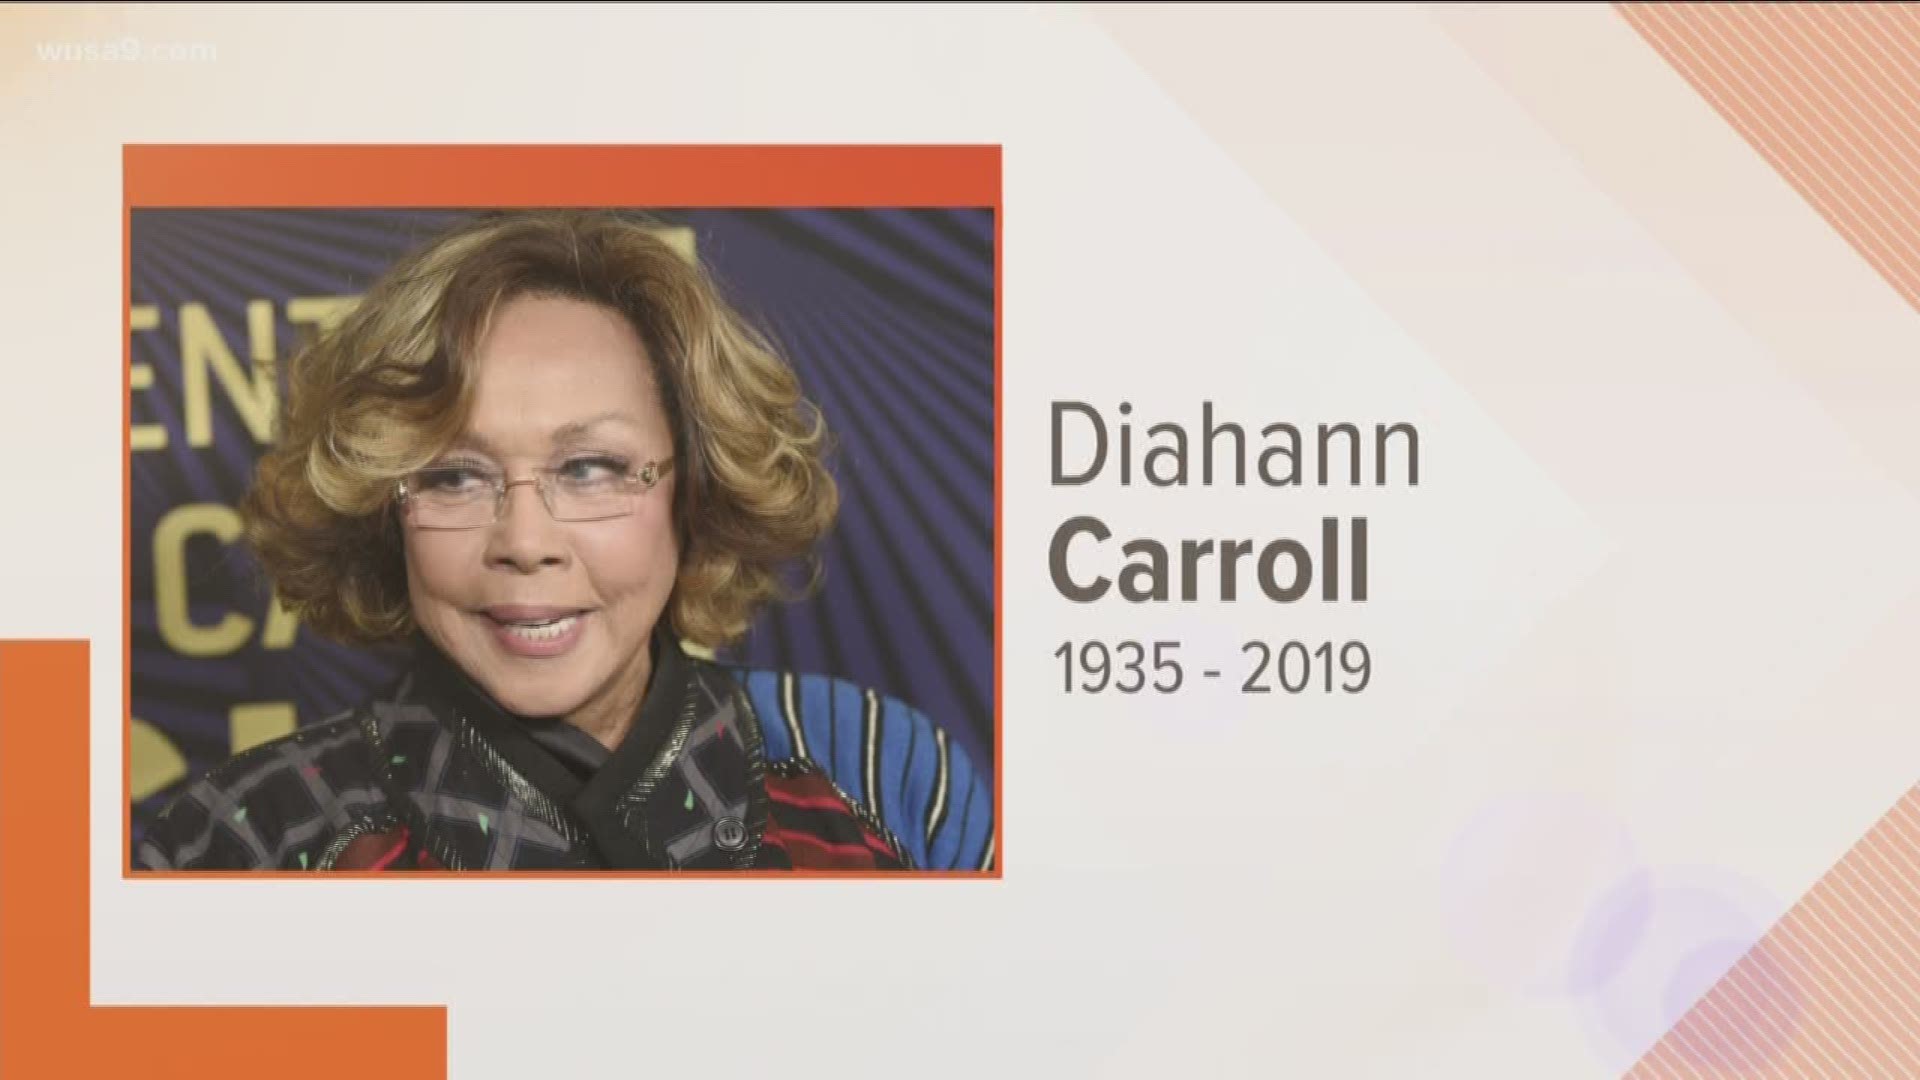 Diahann Carroll, who won critical acclaim as the first black woman to star in a non-servant role in a TV series as 'Julia,' has died. She was 84.